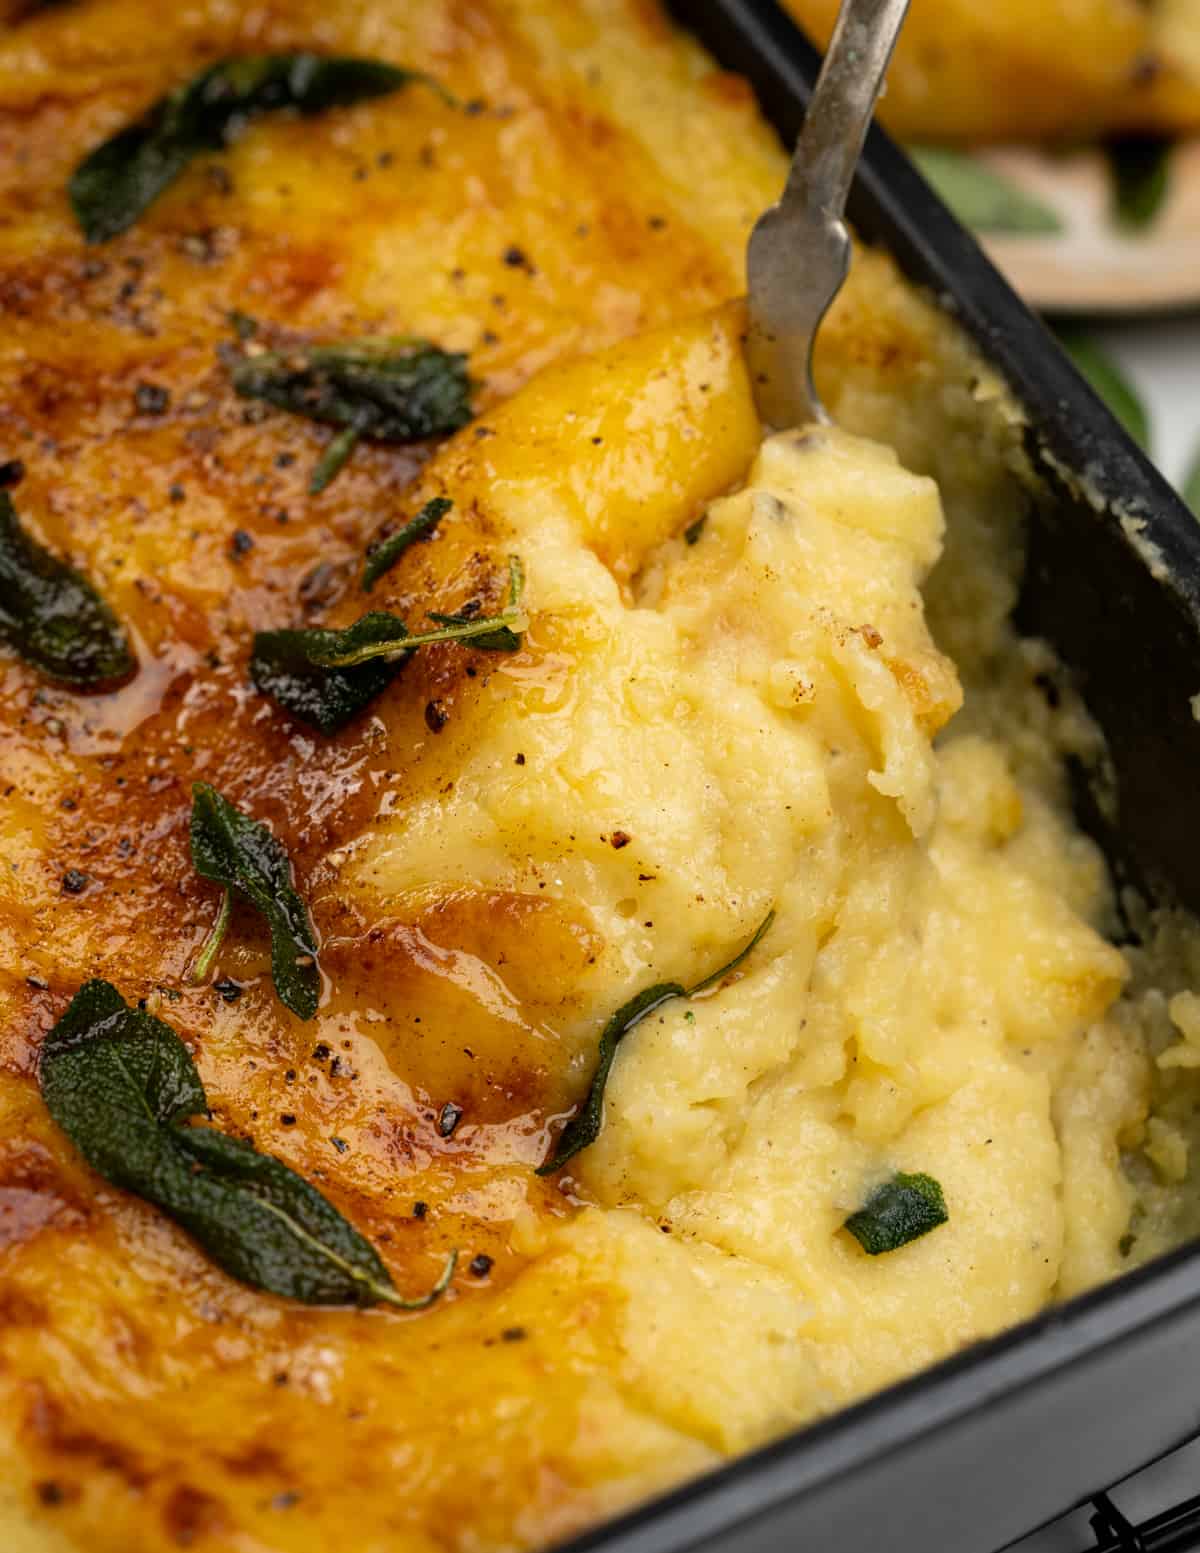  creamy fluffy mashed potato with lots of cheese is baked into a casserole. Top it with brown butter and crispy sage